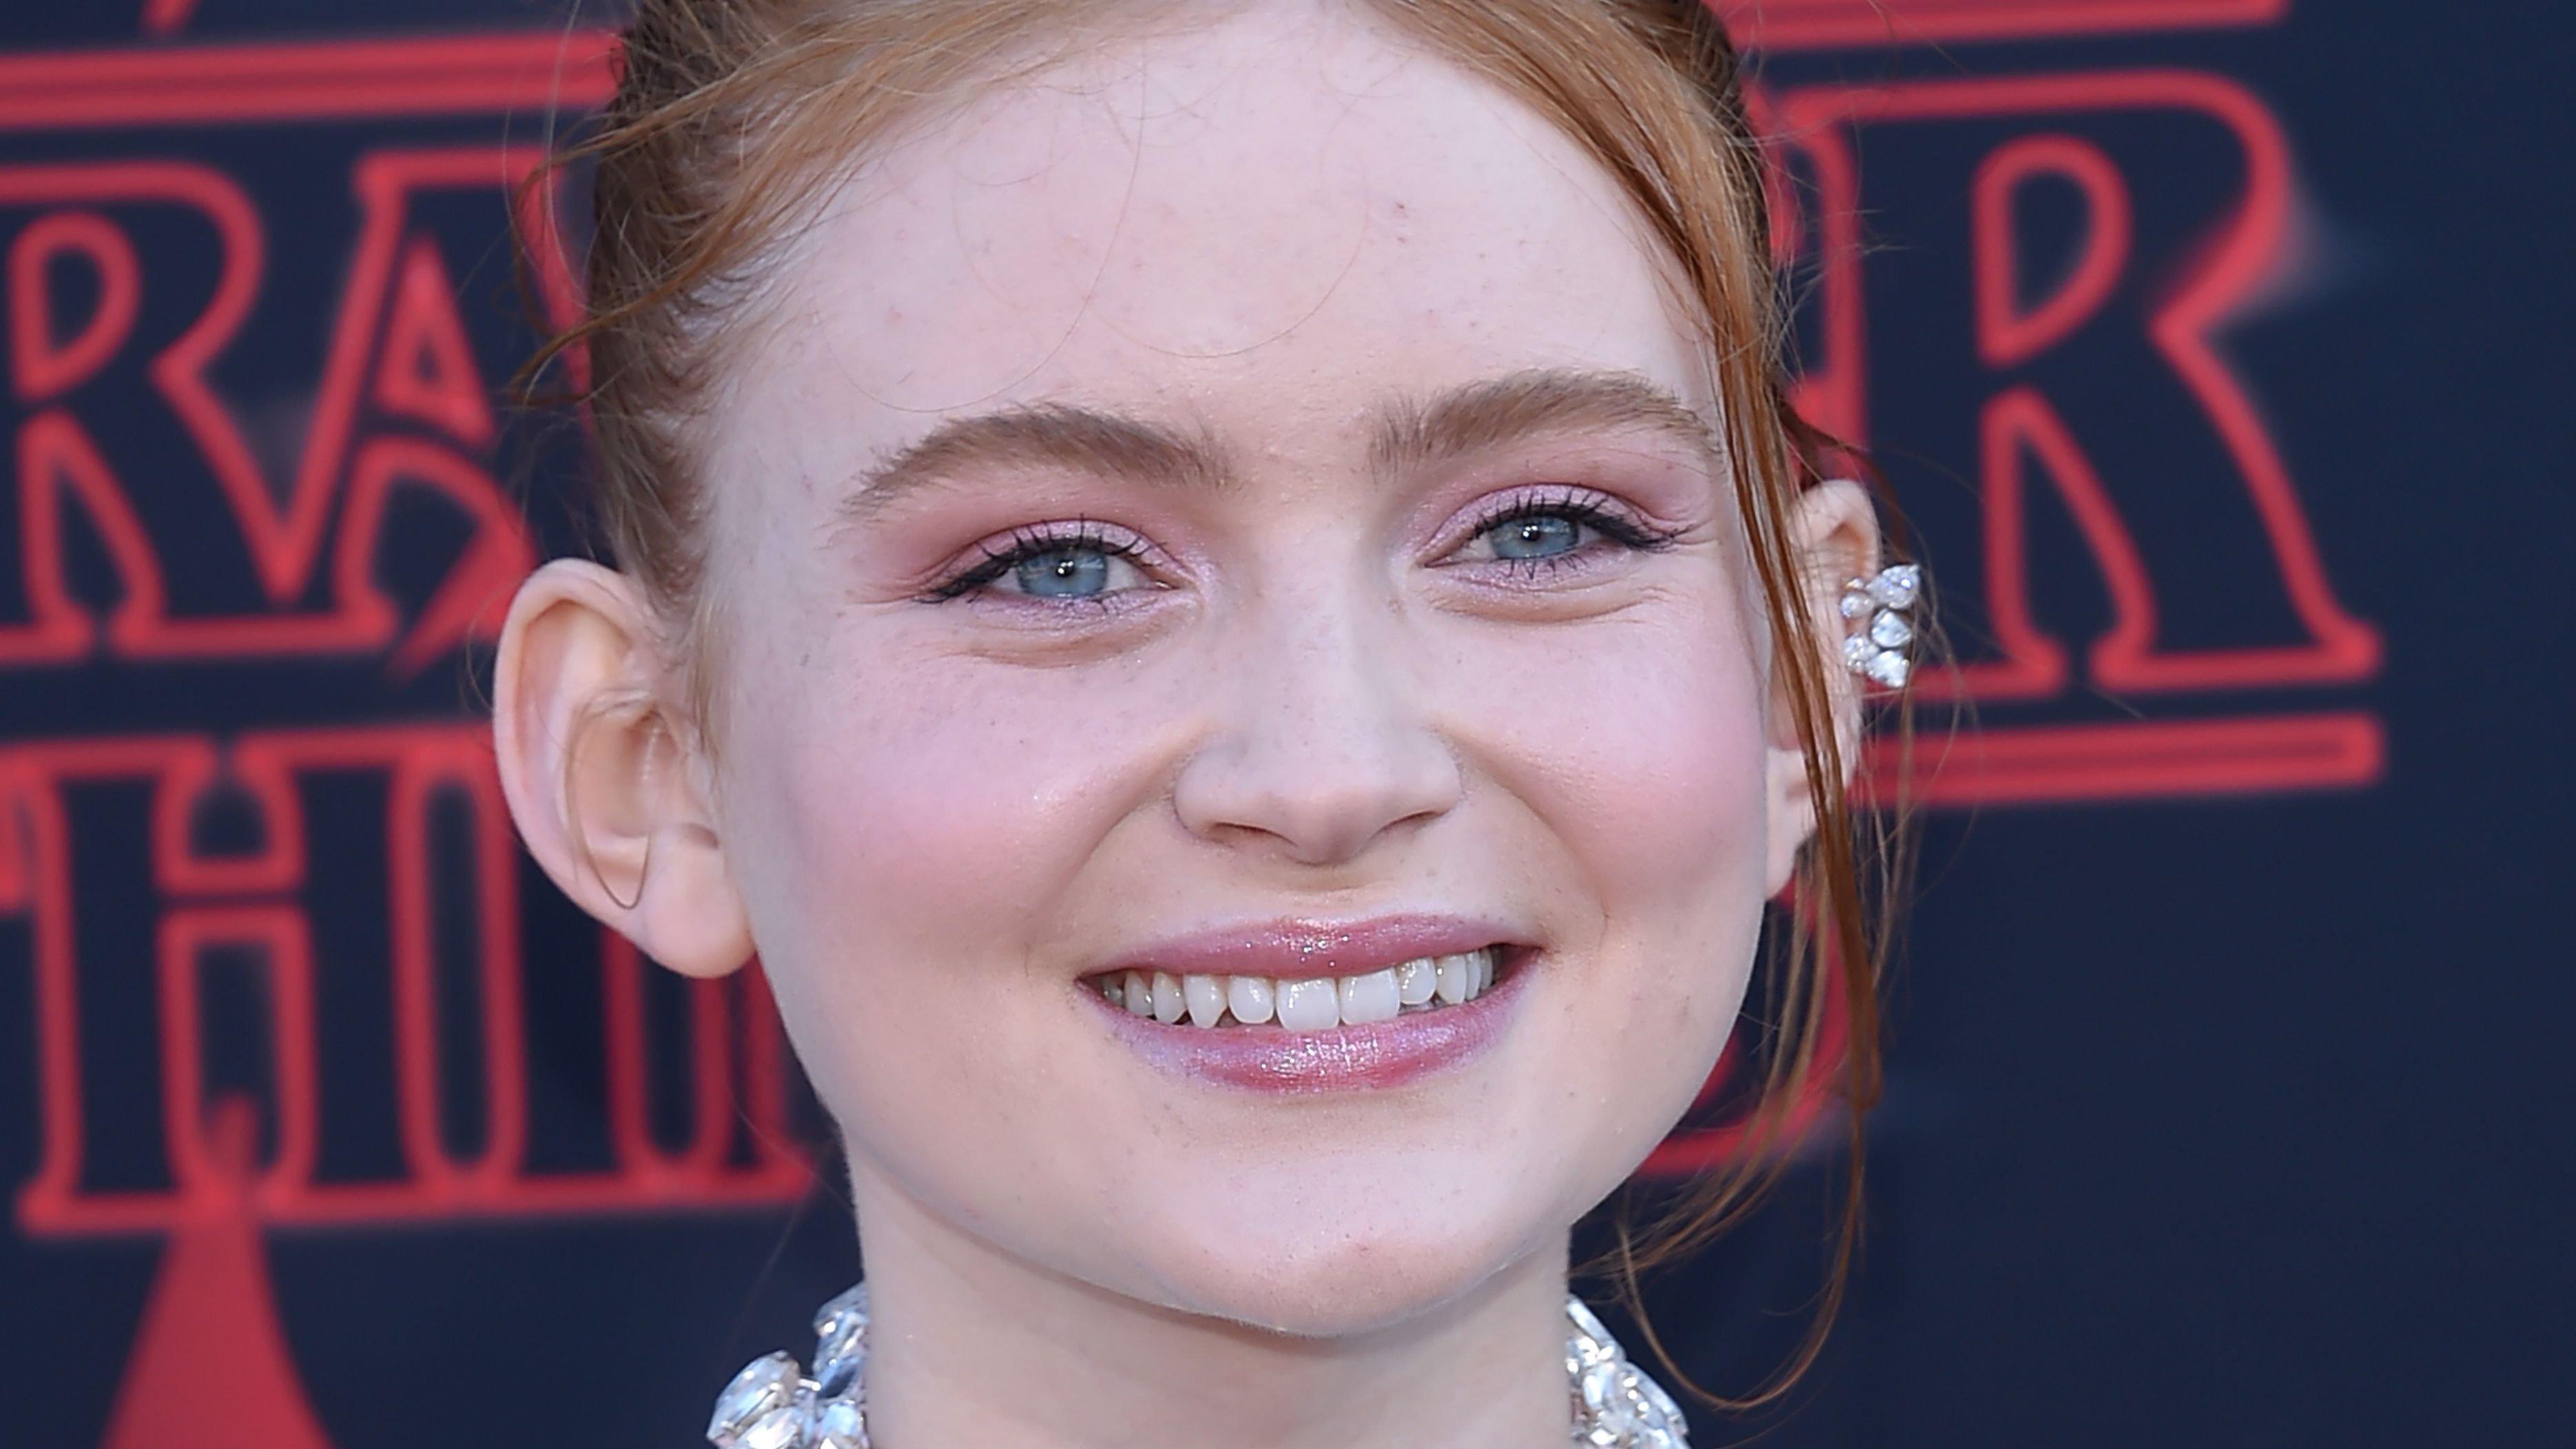 Sadie Sink sporting a tight bun and smiling at the camera.